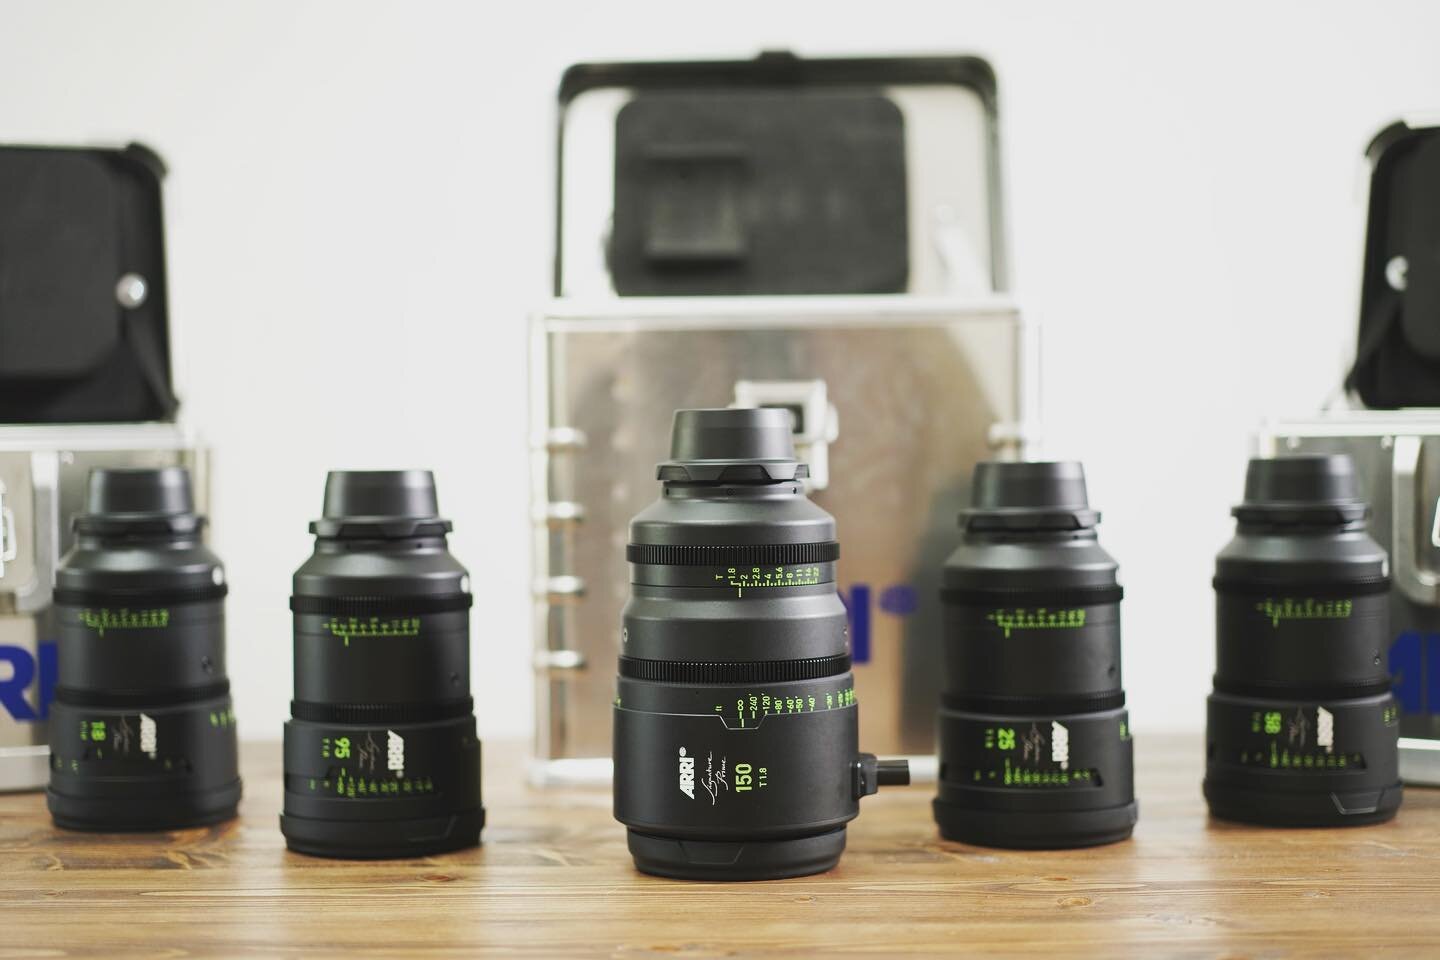 Got all 6 Signature Primes available if you need some lenses!
Not pictured: 40mm
.
.
.
.
#camera #lenses #makeup #beauty #عدسات #fashion #eyes #photography #production #austin #lens #camera #love #artist #Arri #glass #cameradept #ilmtools #arrirental